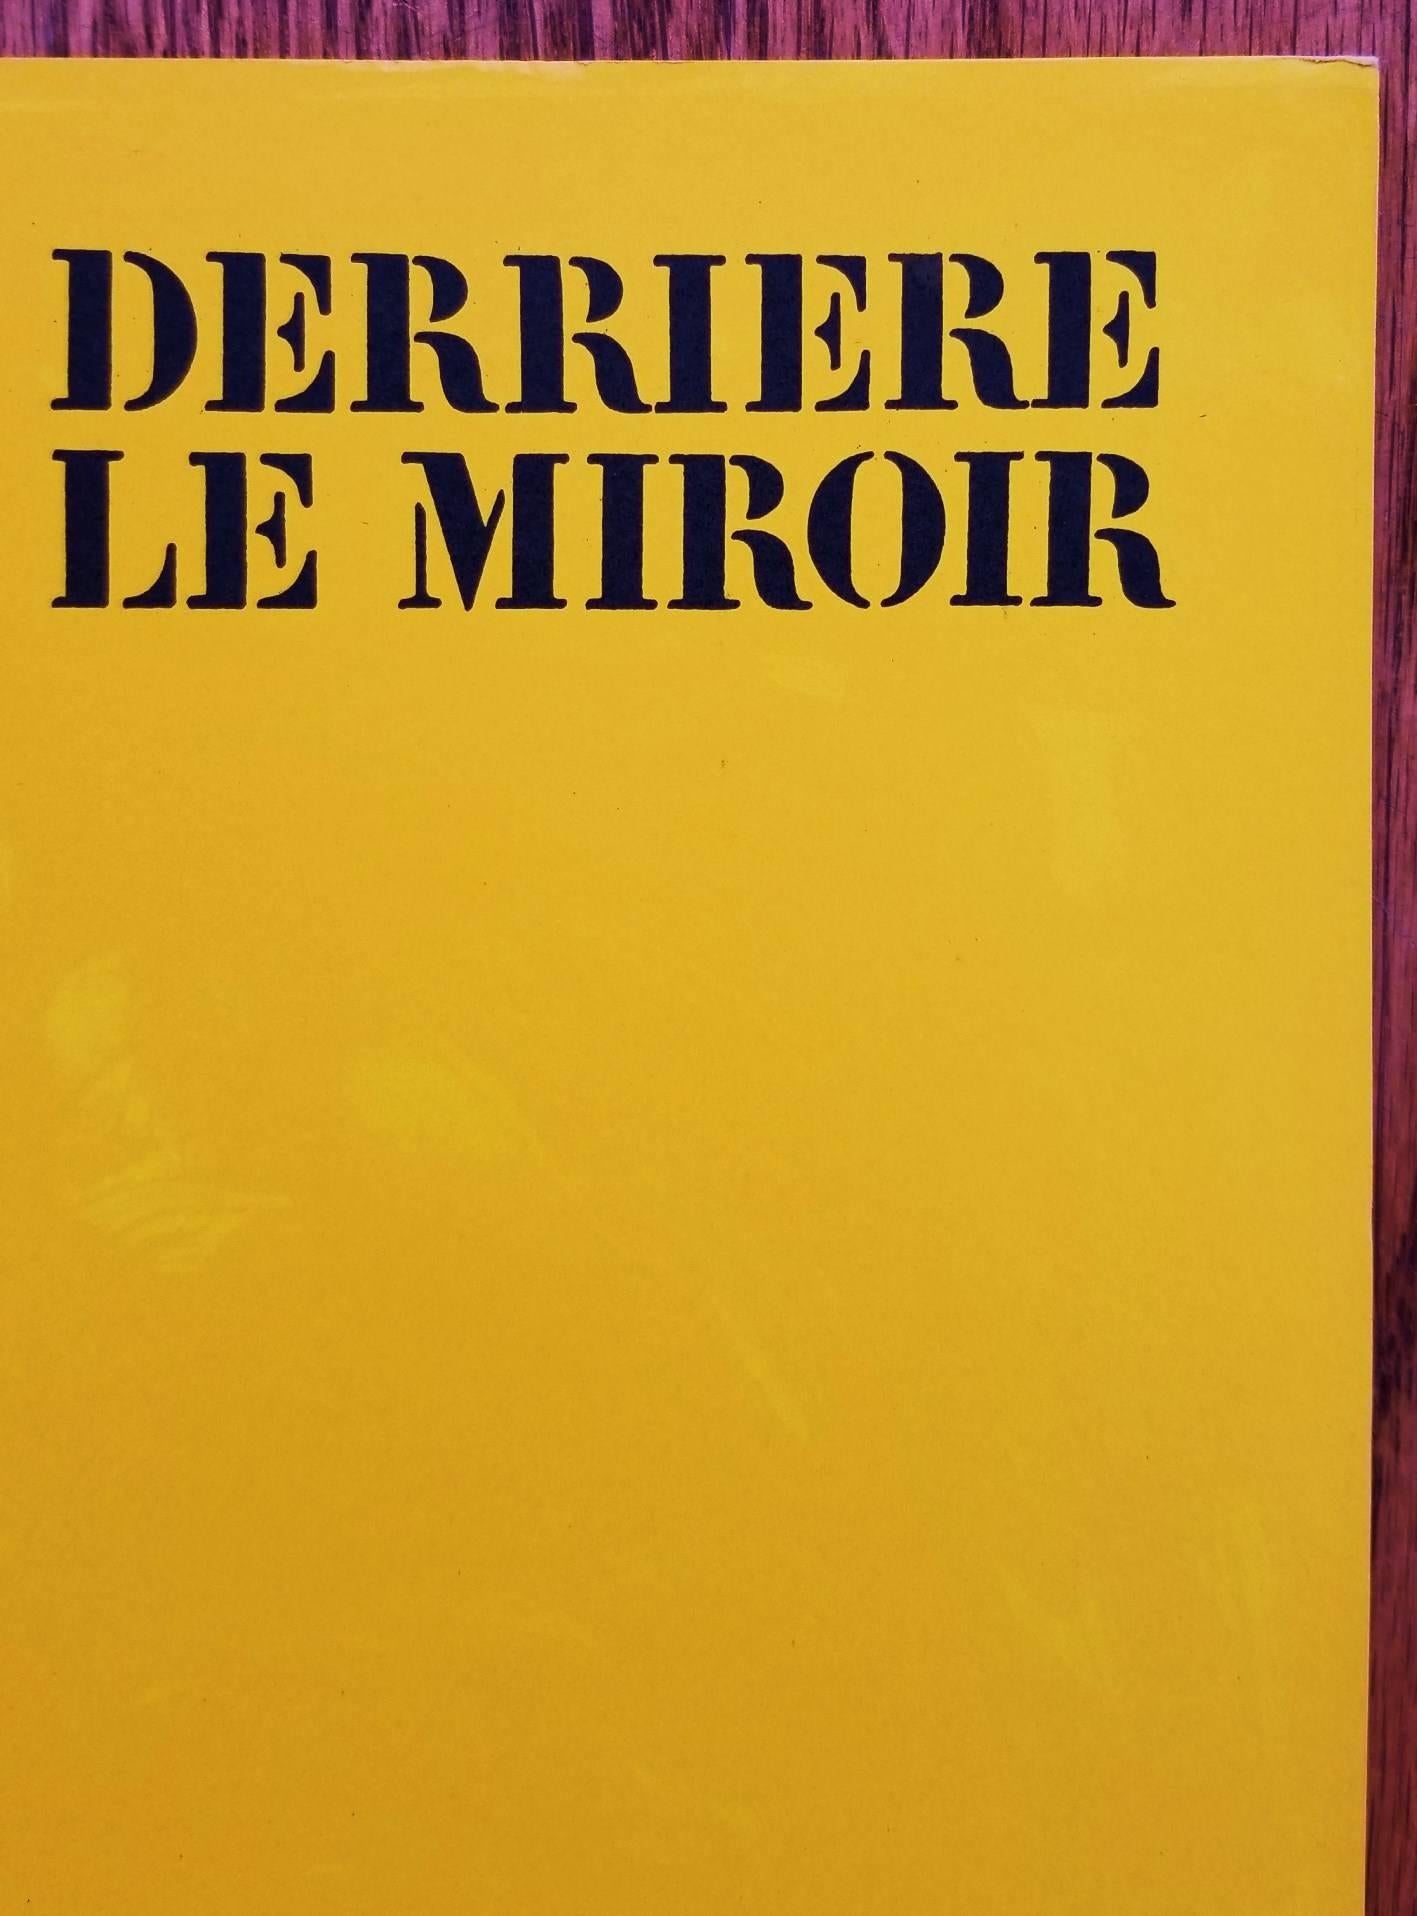 Derriere Le Miroir No. 173 (front cover)  - Abstract Print by Alexander Calder